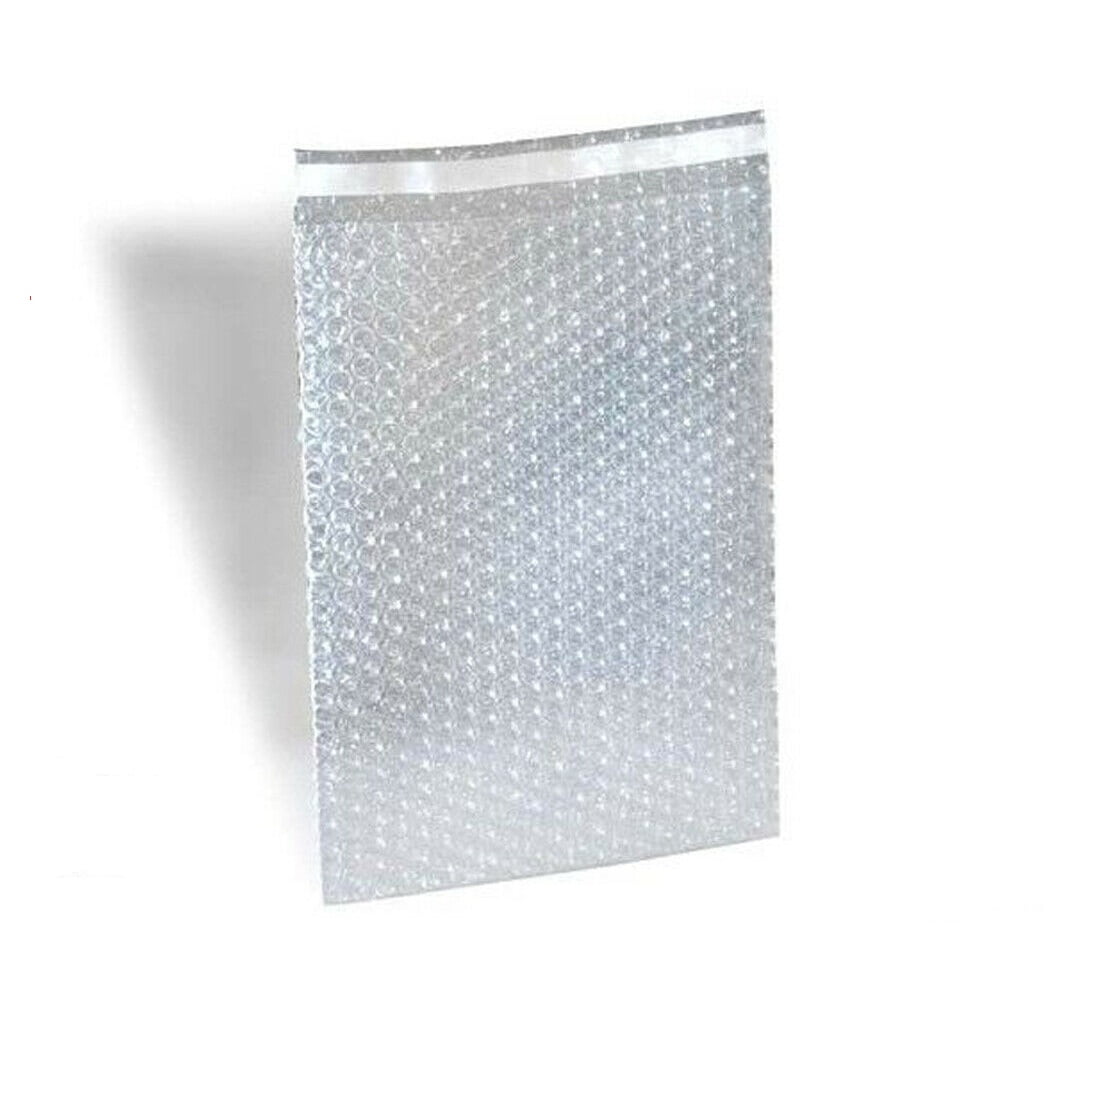 25 8x15.5 BUBBLE OUT POUCHES BAGS WRAP CUSHIONING SELF SEAL CLEAR 8" x 15.5" 